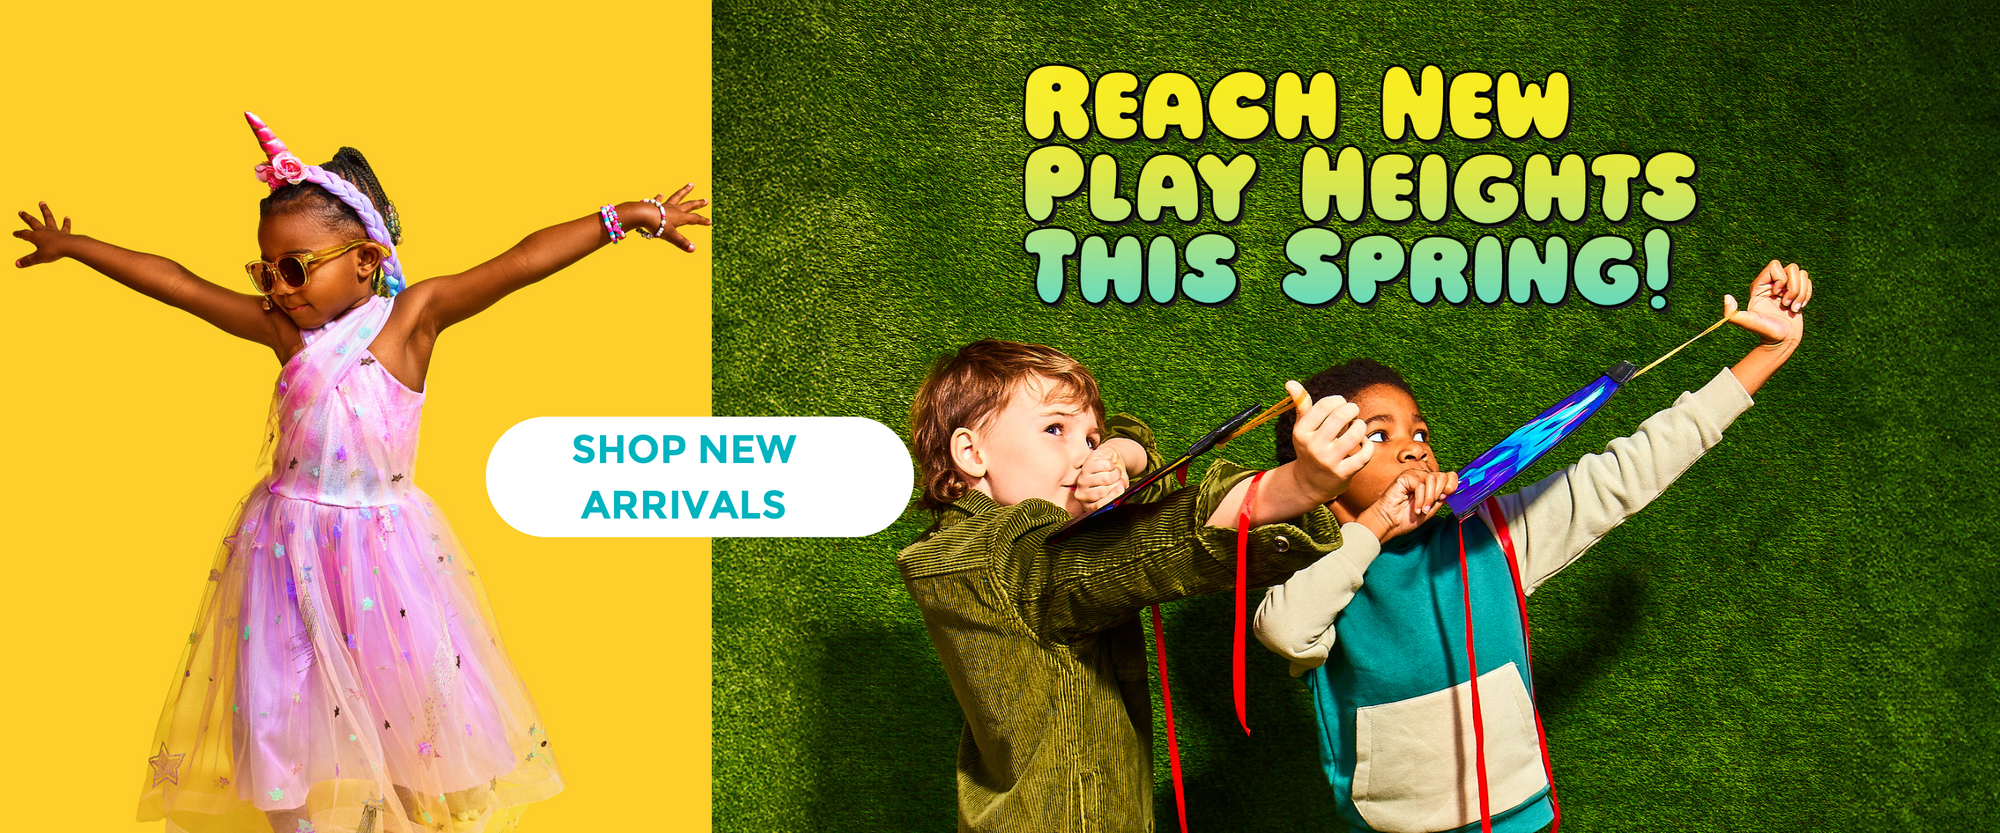 SHOP NEW ARRIVALS & Reach New Play Heights This Spring!